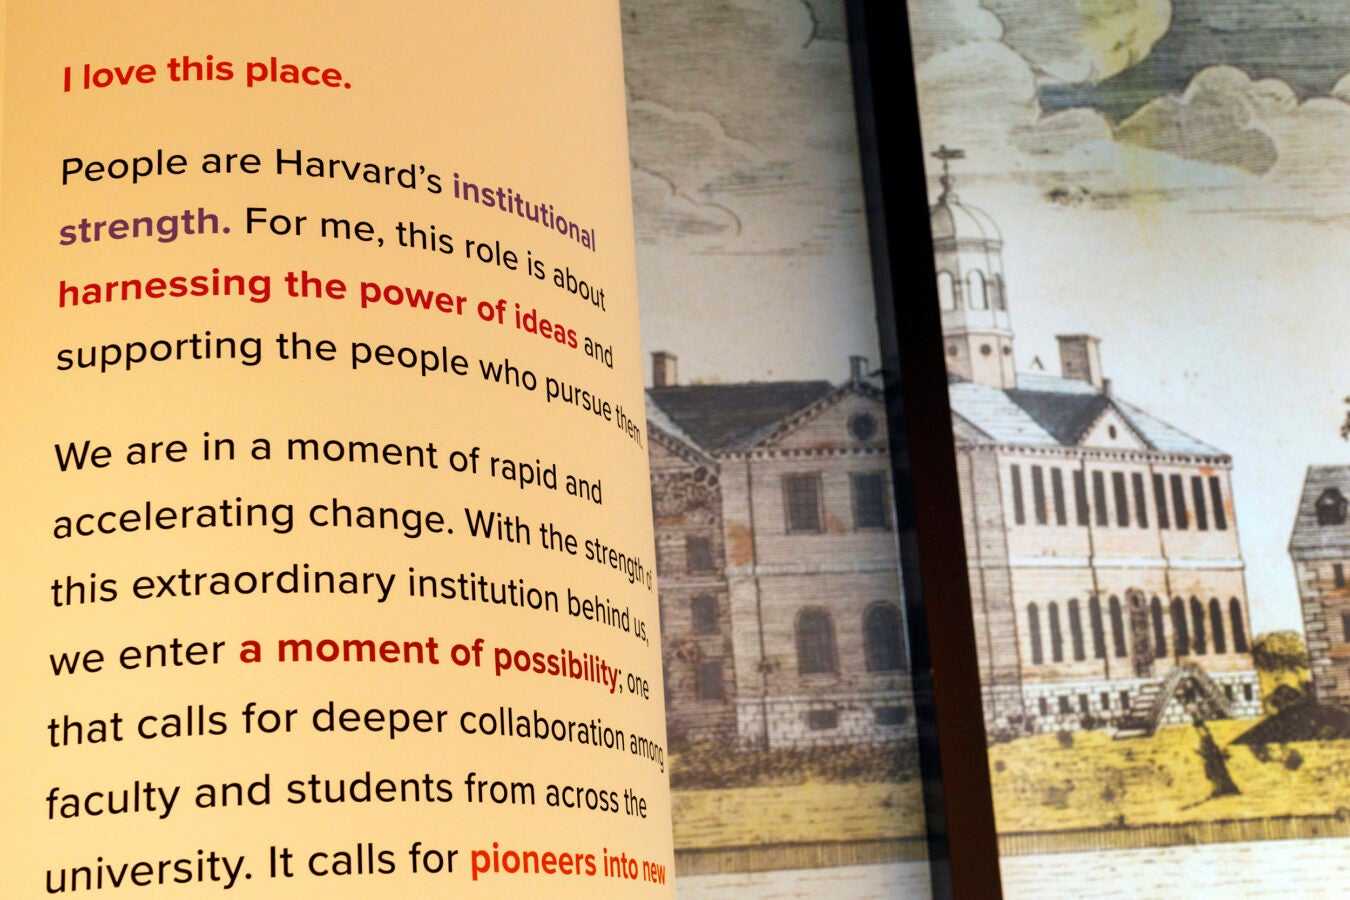 Large text from Claudine Gay speech displayed alongside historical illustrations of Harvard's campus.